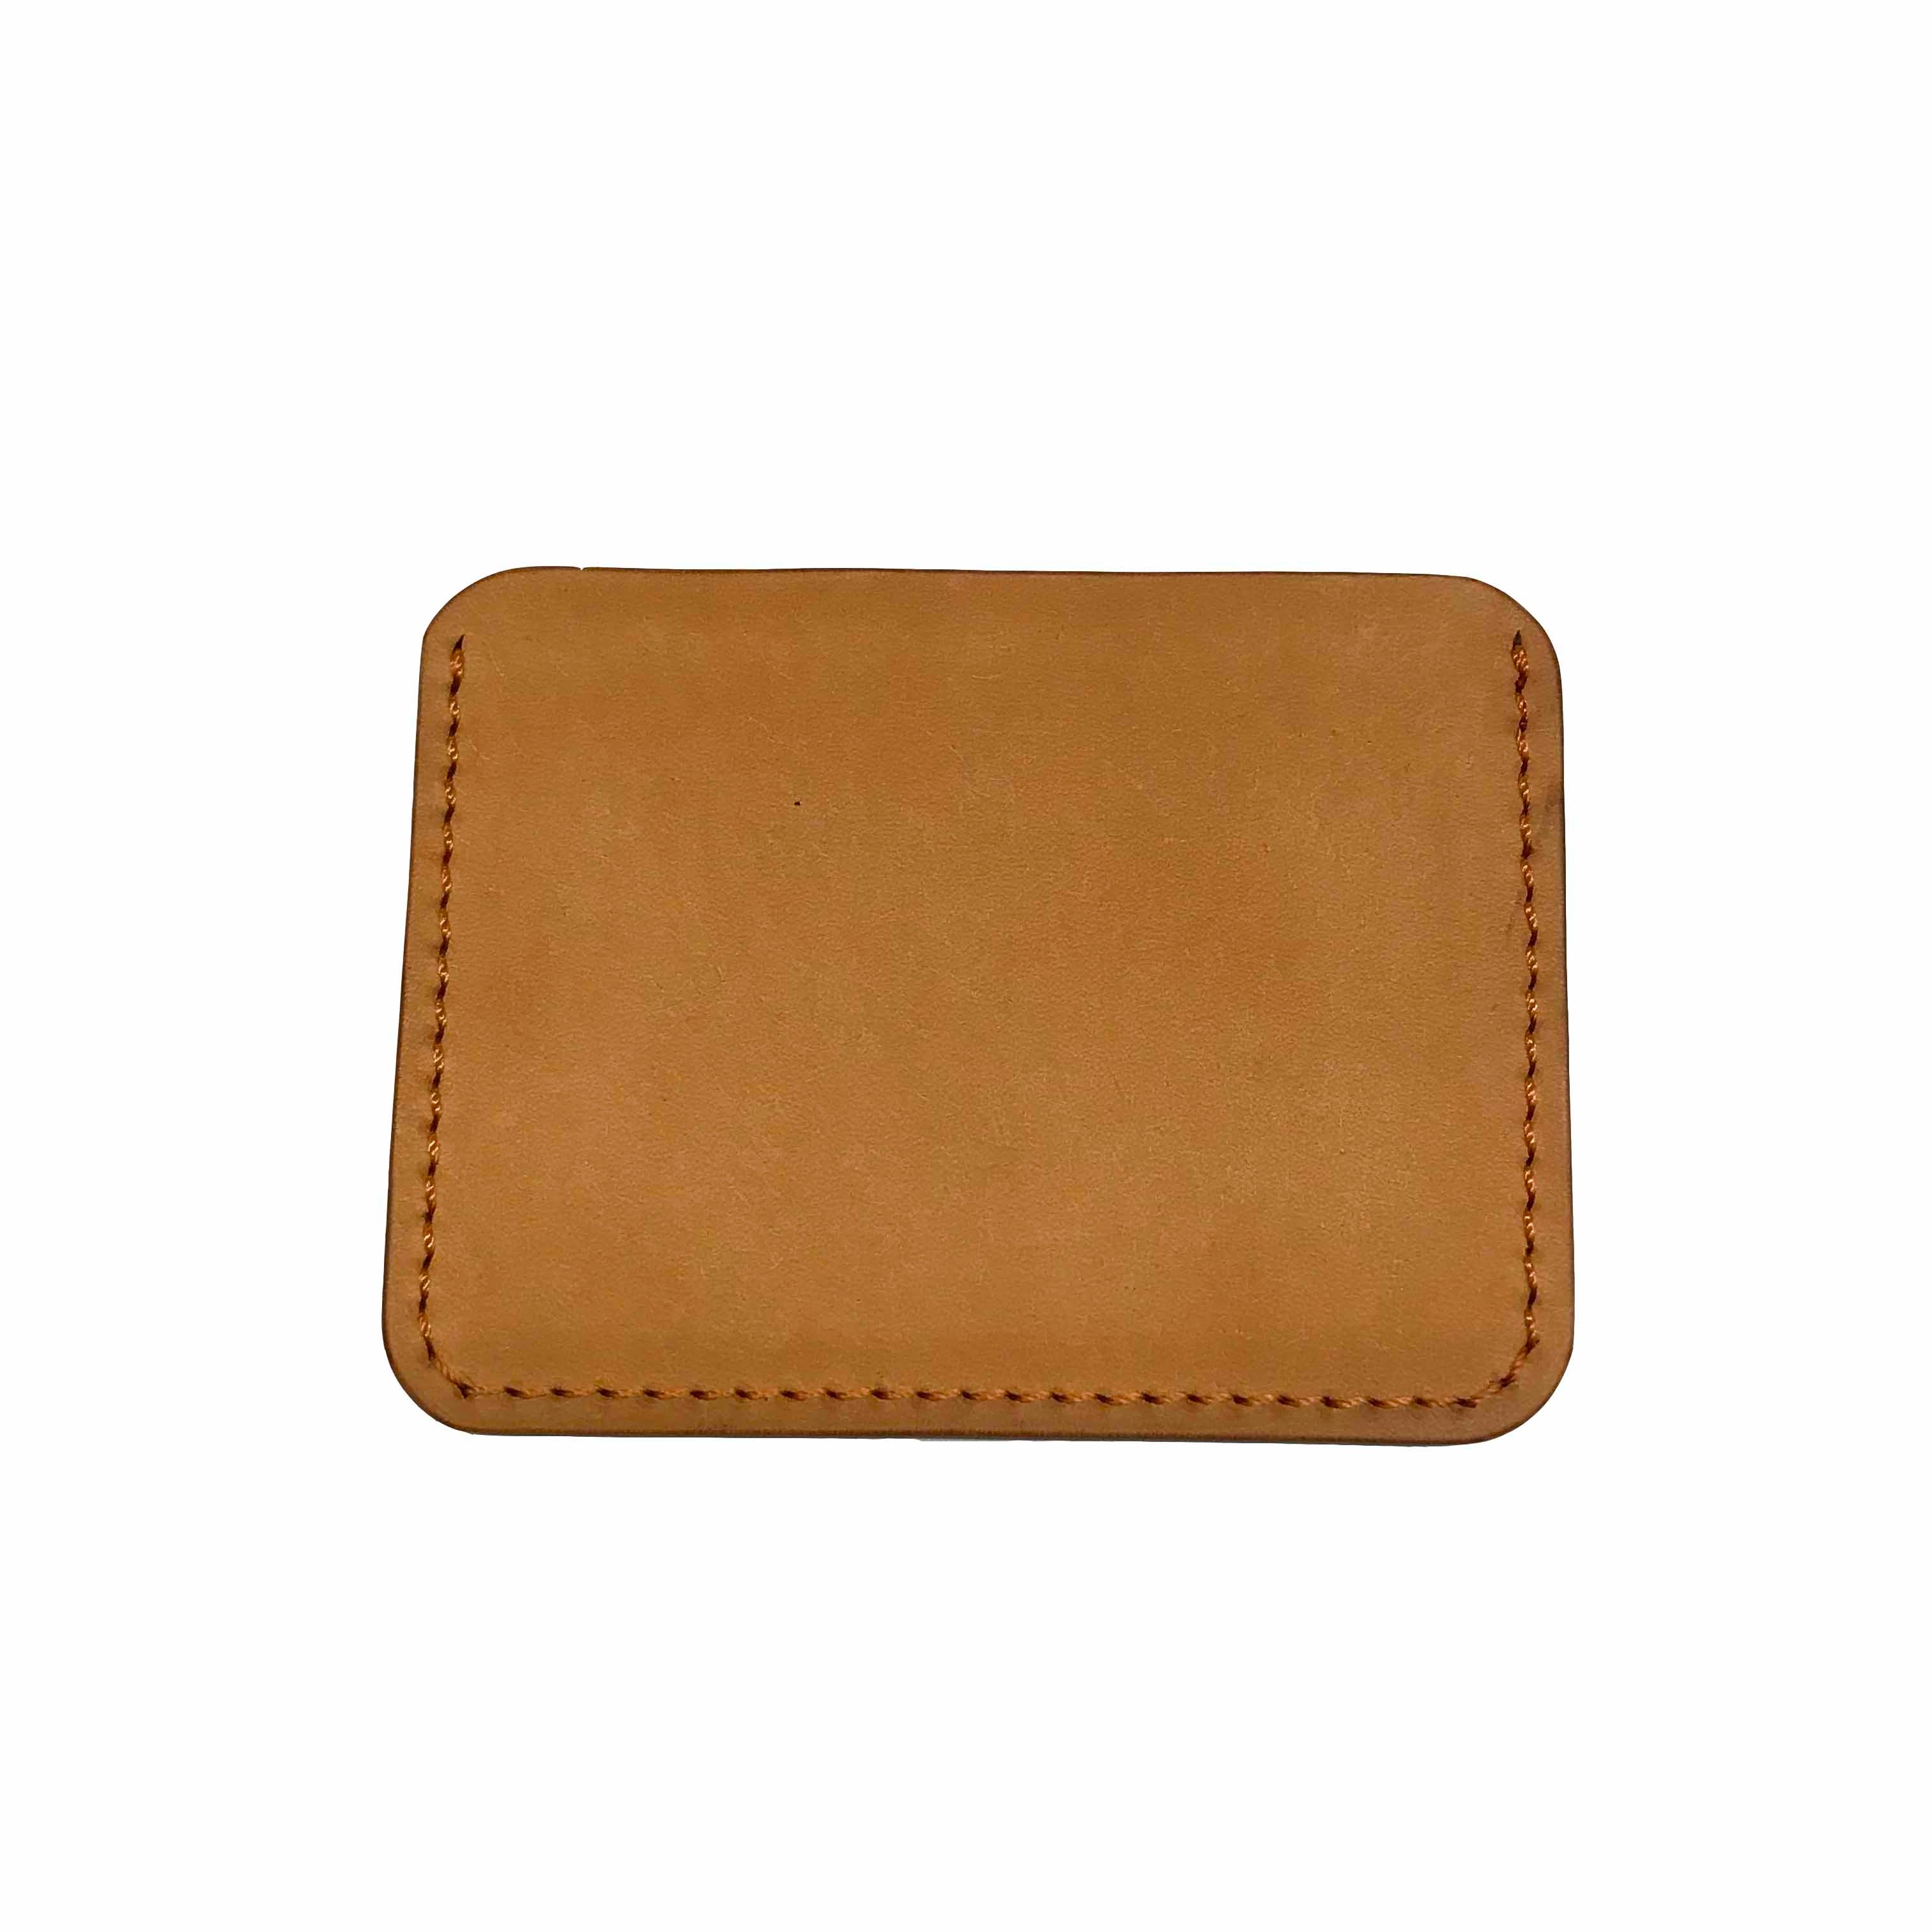 Buff Leather Wallet